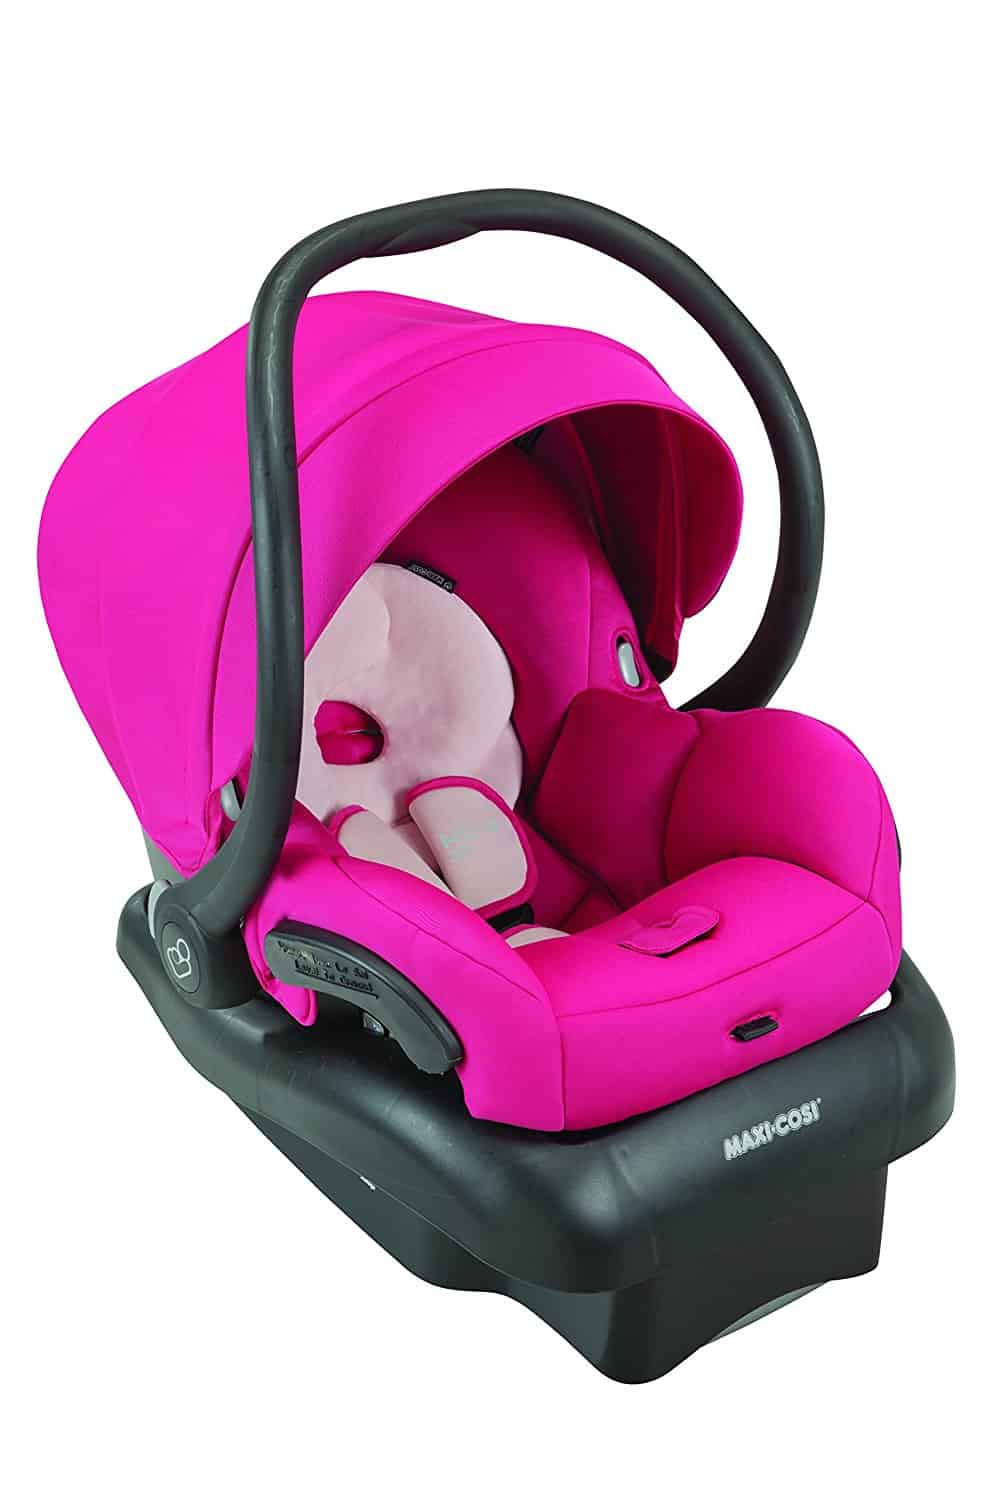 Infant Car Seat Review Maxi Cosi Mico 30 Max Baby Bargains - Maxi Cosi Mico 30 Car Seat Weight Limit